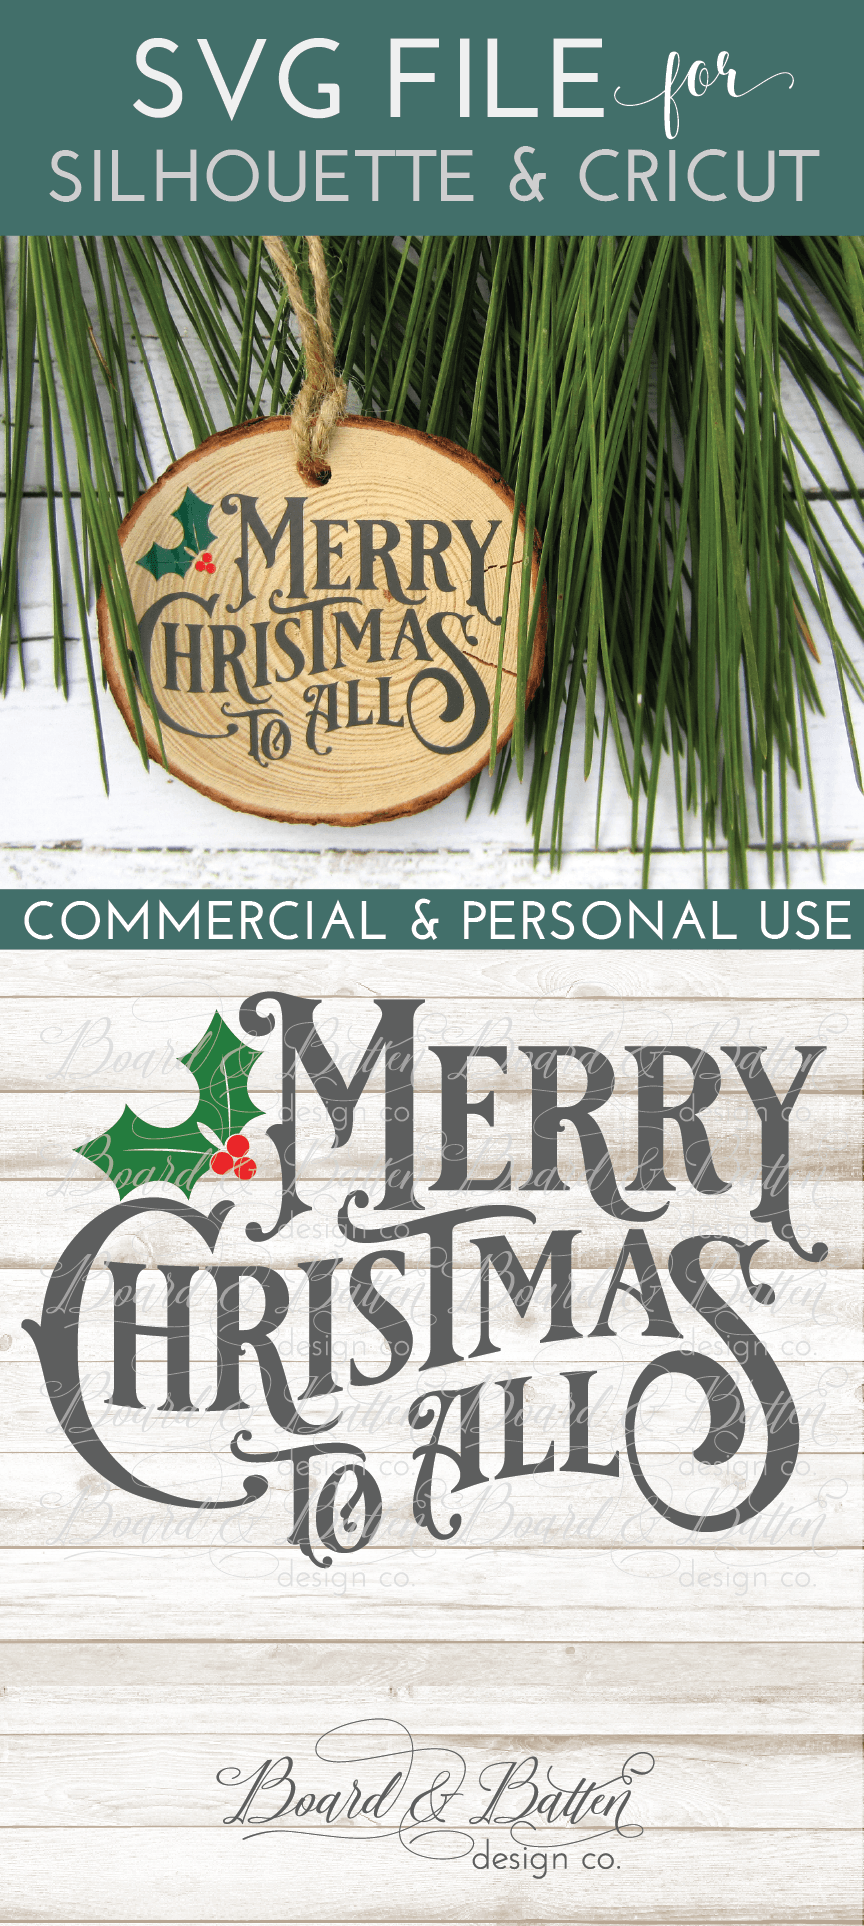 Download Merry Christmas To All Vintage Christmas Svg File Board Batten Design Co